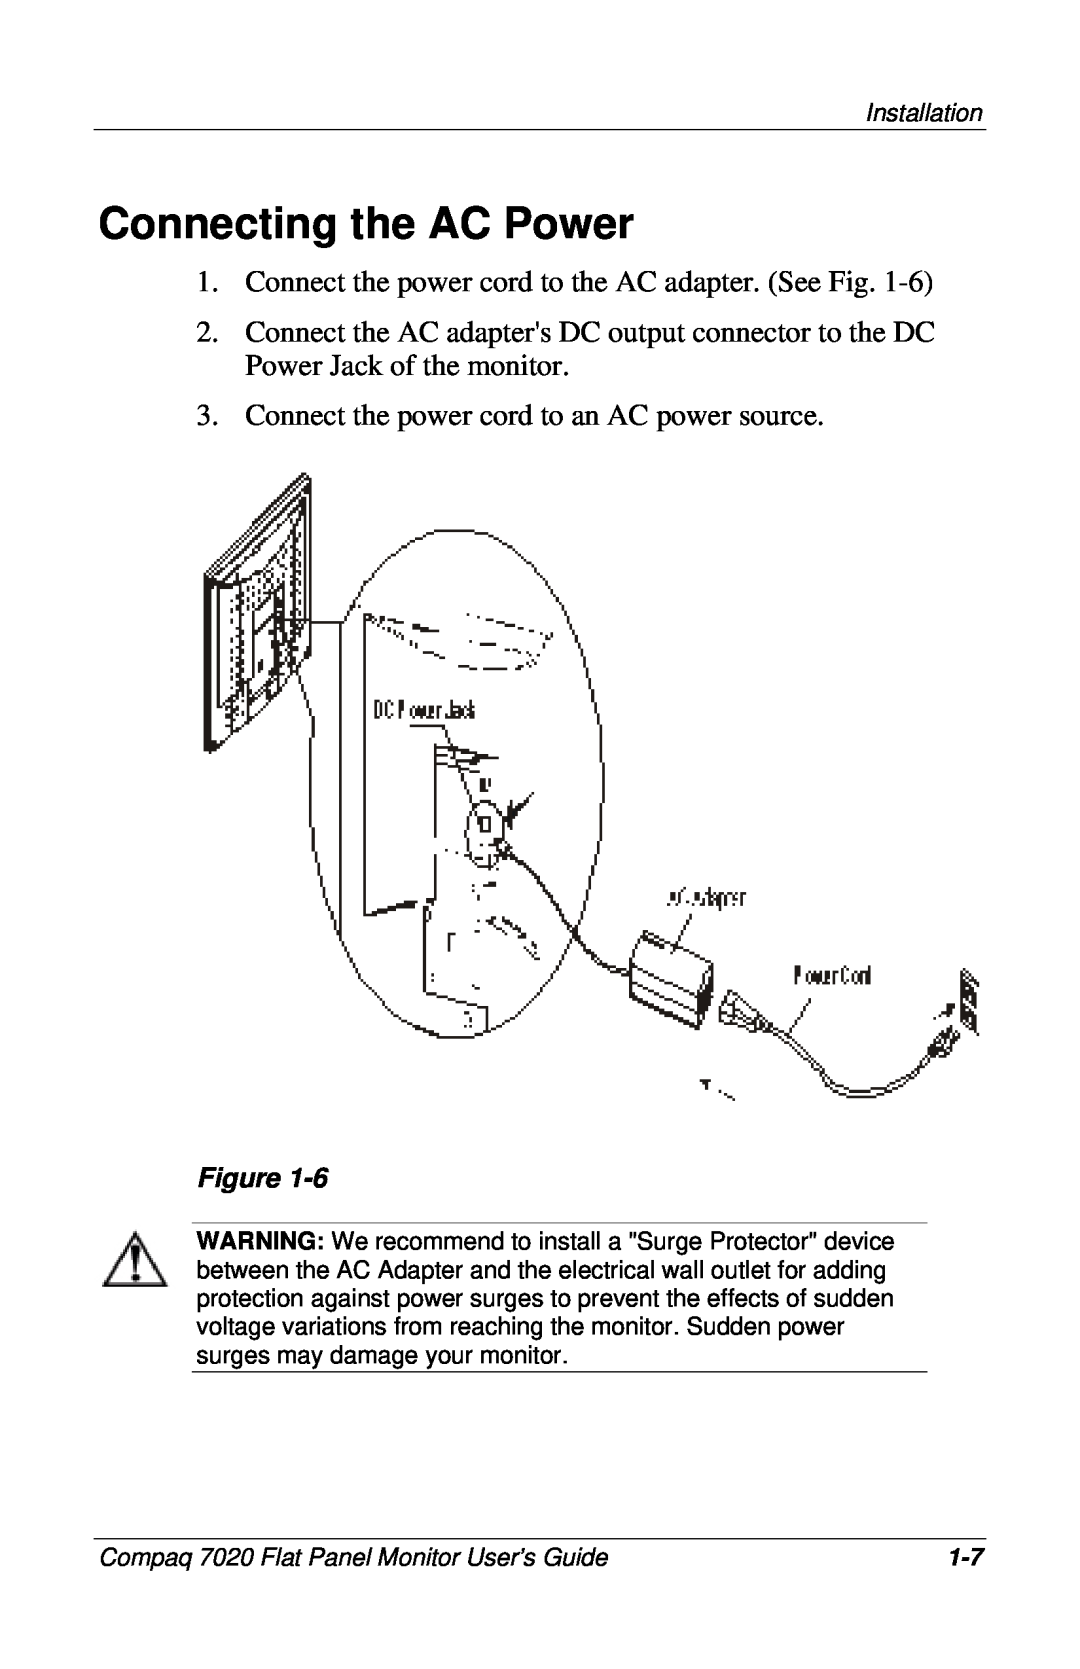 Compaq 7020 manual Connecting the AC Power, Connect the power cord to the AC adapter. See Fig, Installation 